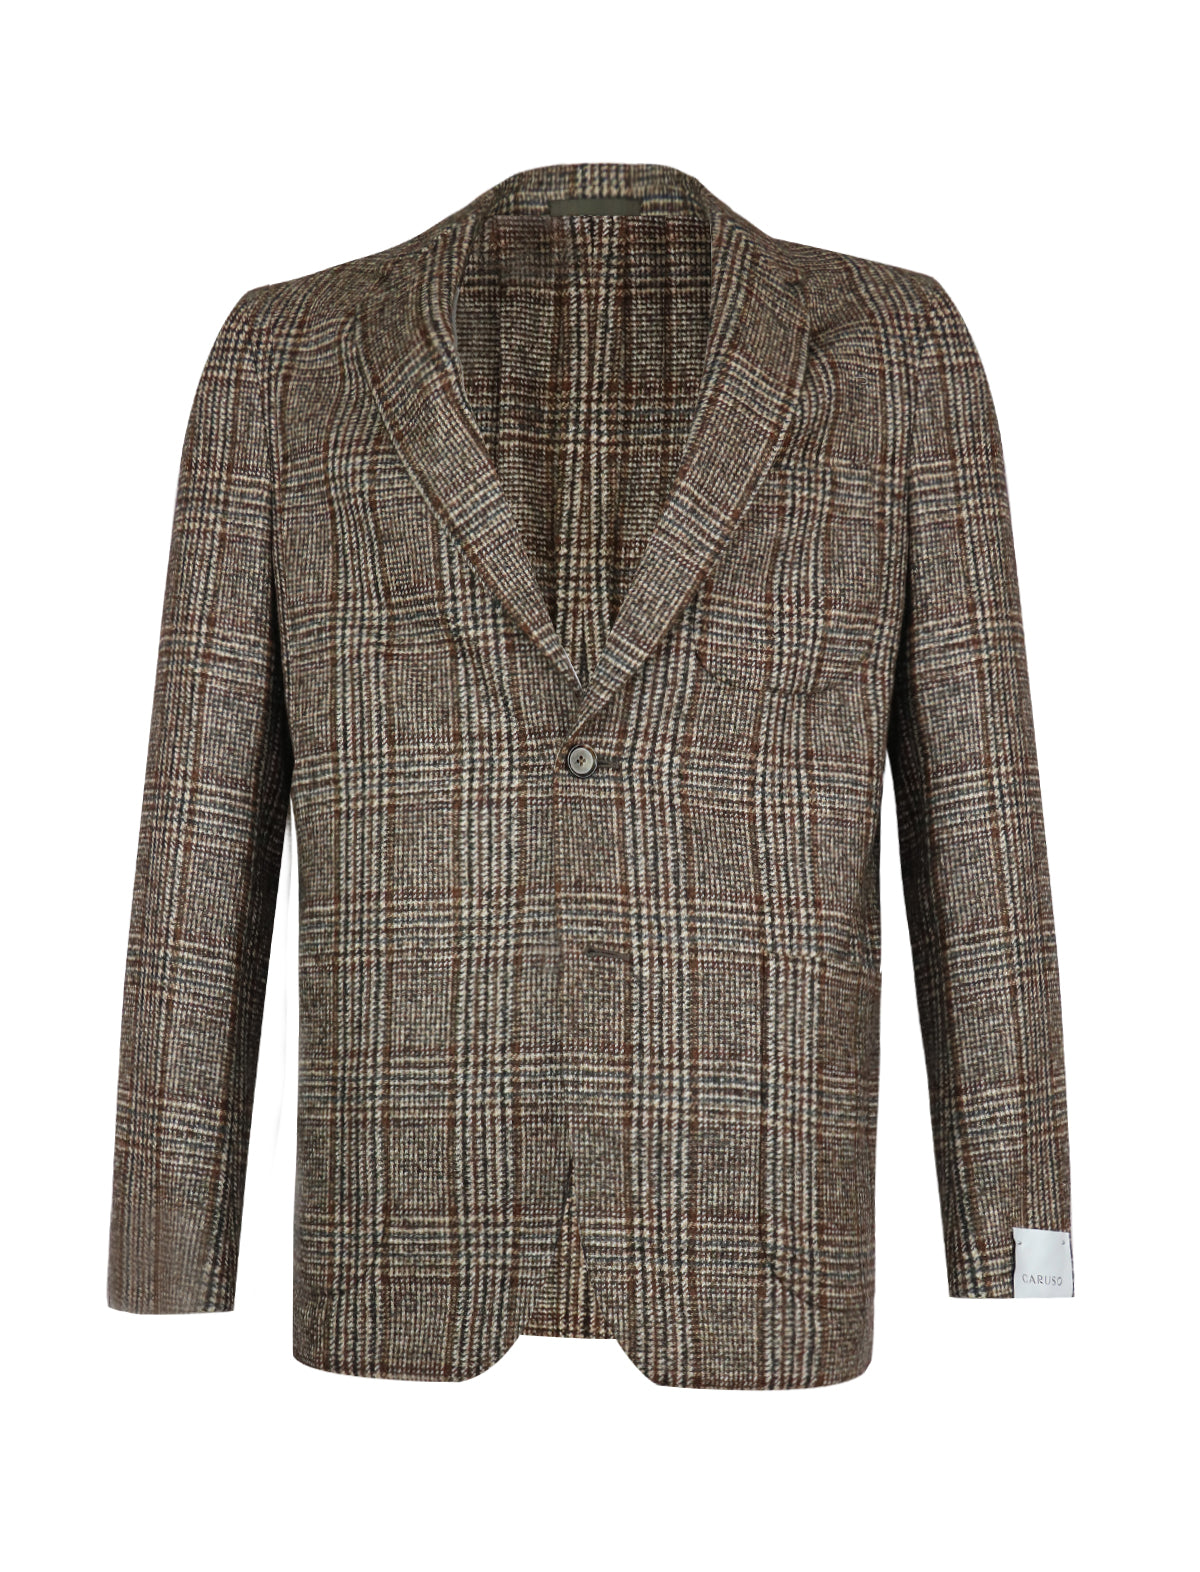 CARUSO Single-Breasted Wool-Blend Blazer in Brown Plaid